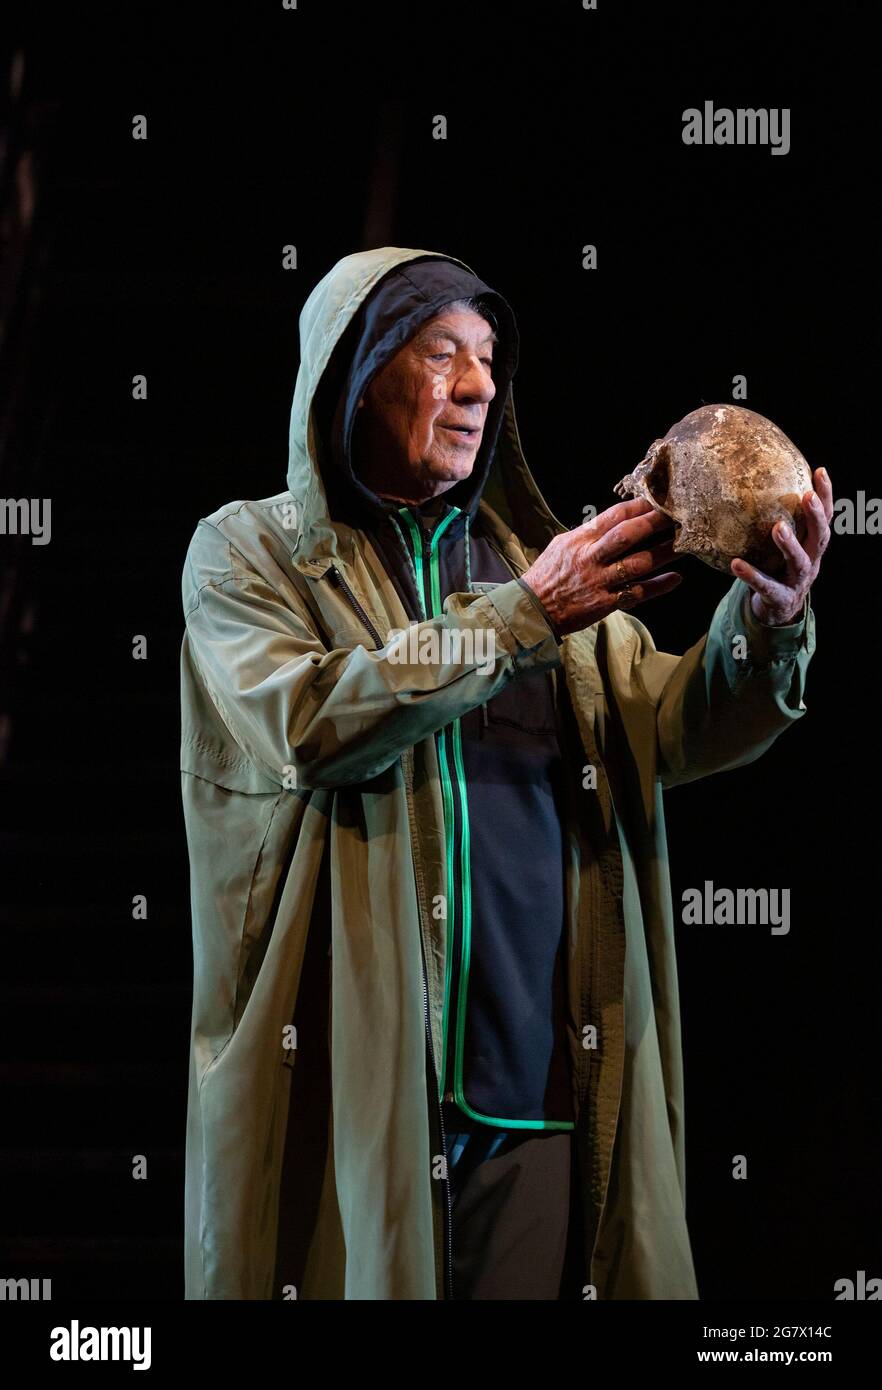 Ian McKellen as Hamlet with the skull of Yorick in HAMLET by Shakespeare opening at the Theatre Royal Windsor, England on 20/07/2021 set design: Lee Newby  costumes: Loren Epstein  wigs & make-up: Susanna Peretz  lighting: Zoe Spurr  director: Sean Mathias Stock Photo